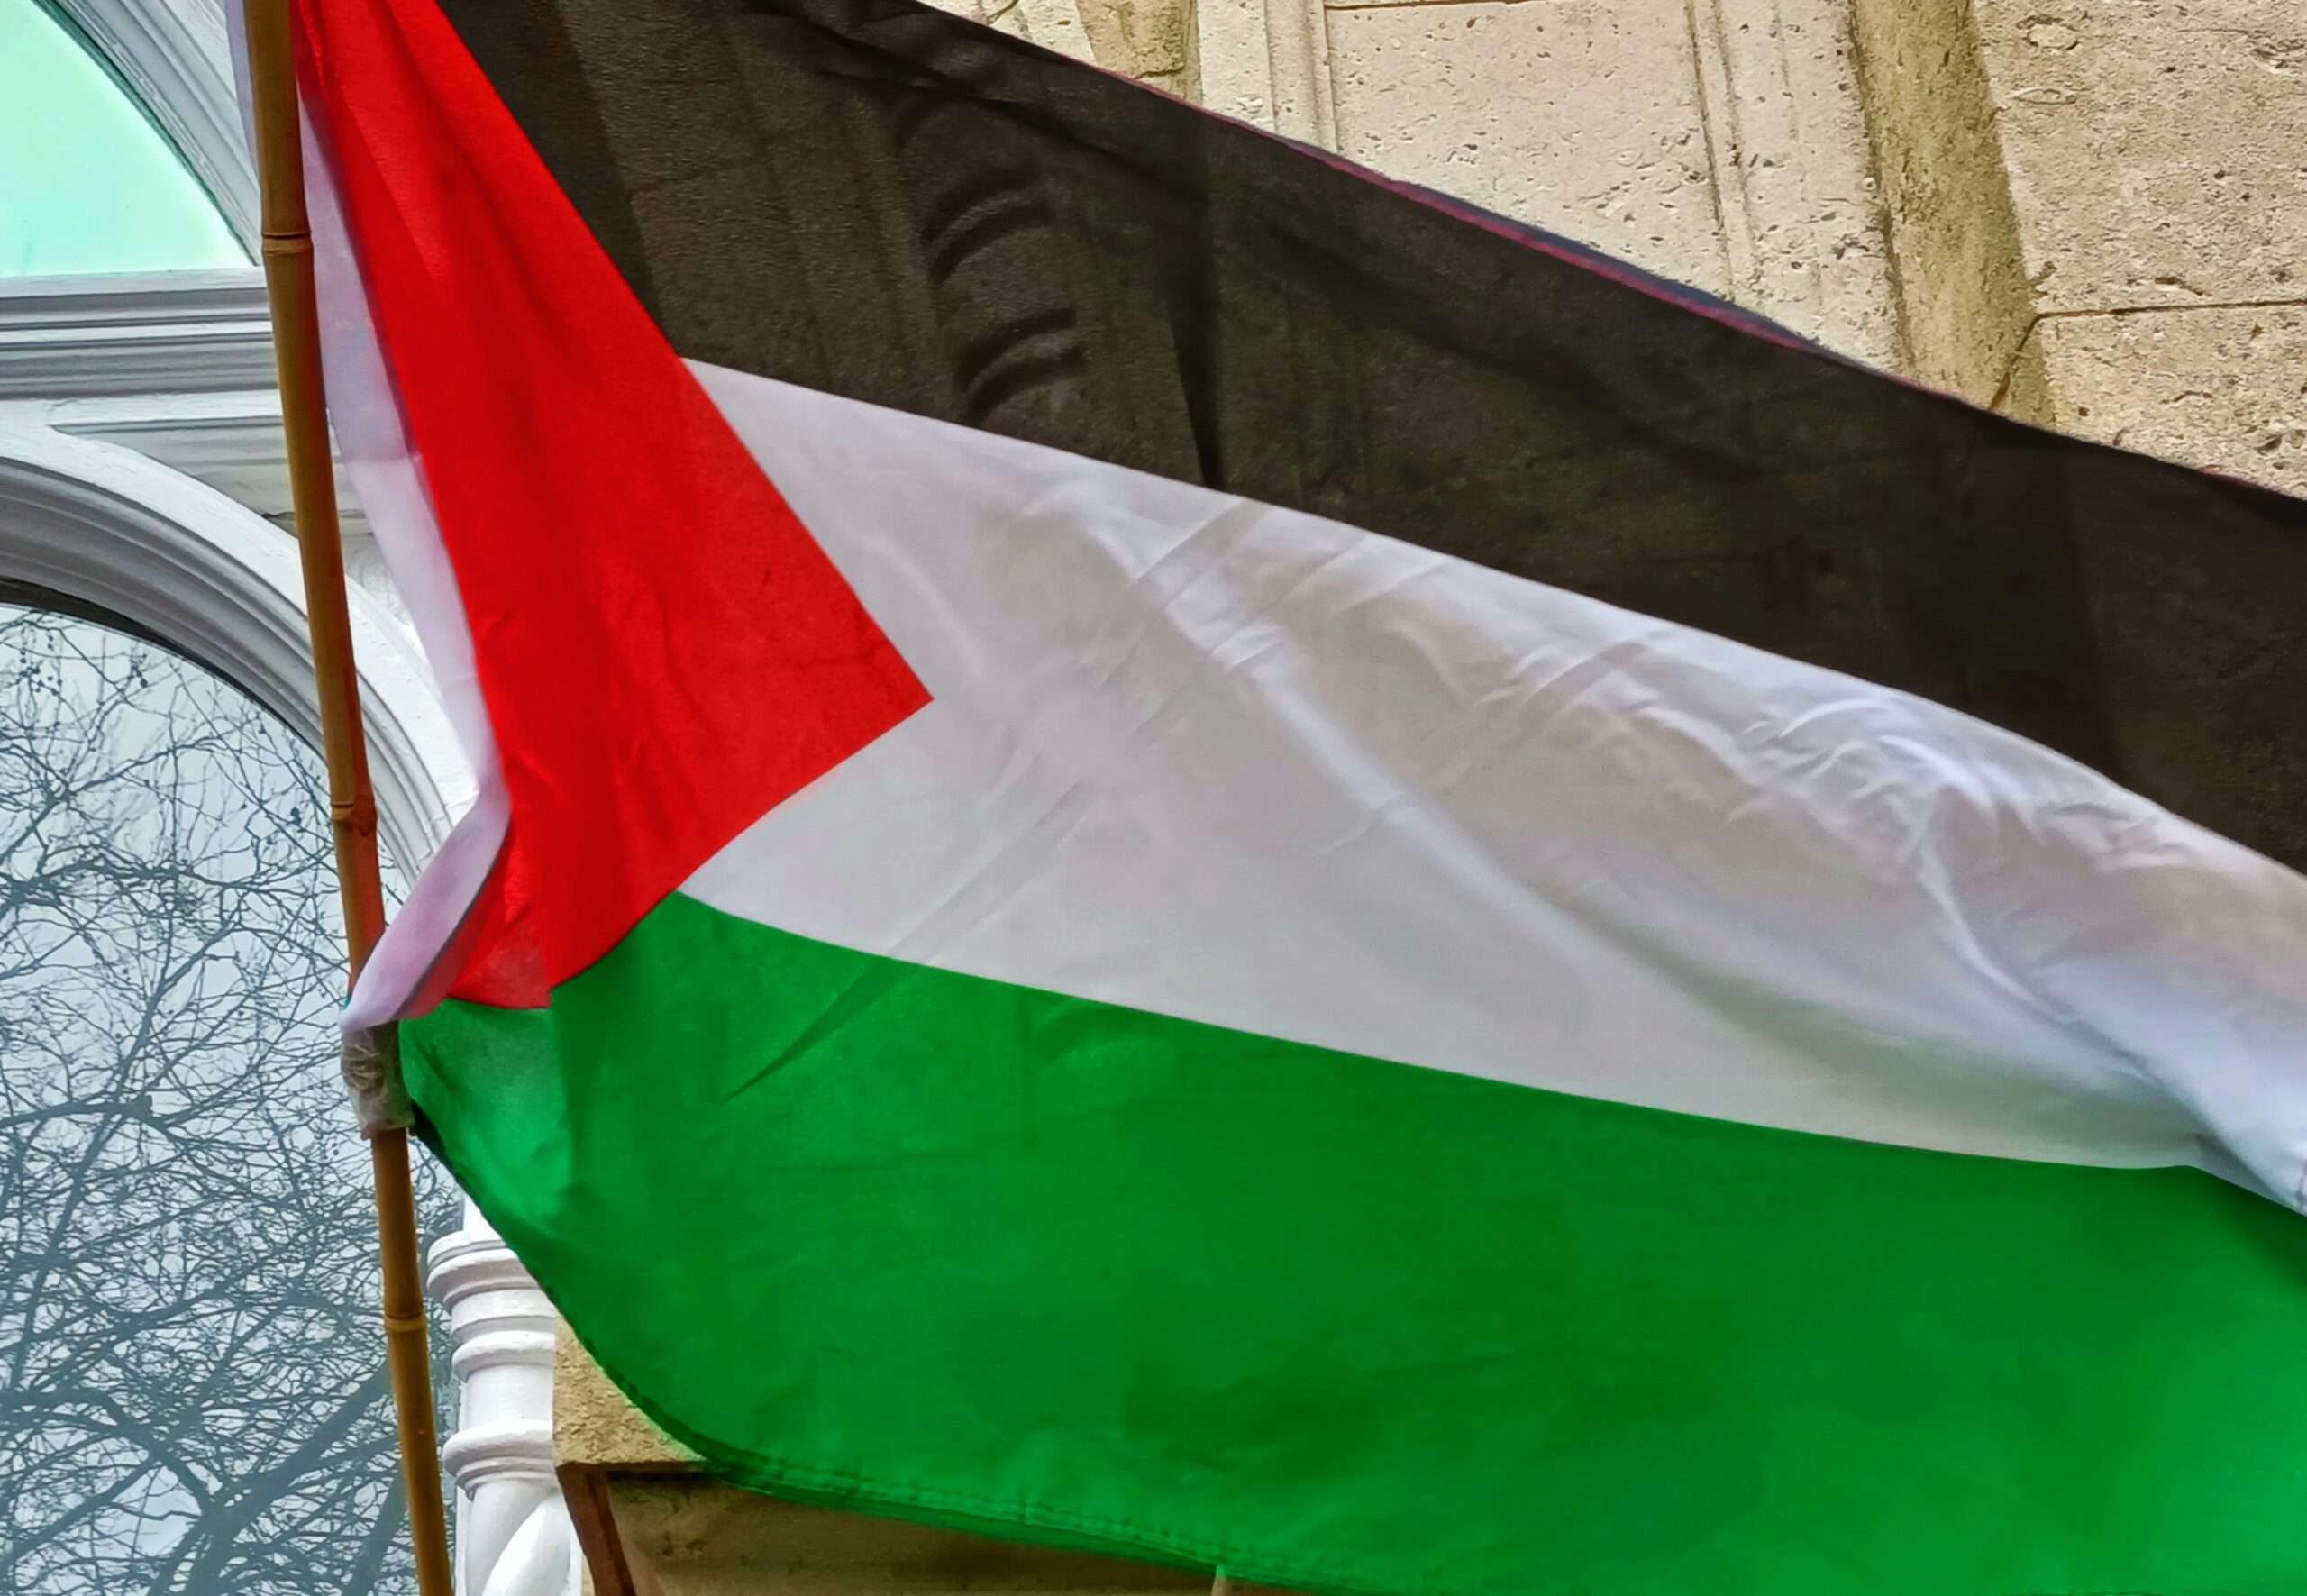 Palestine Solidarity Campaign groups call on people to take action